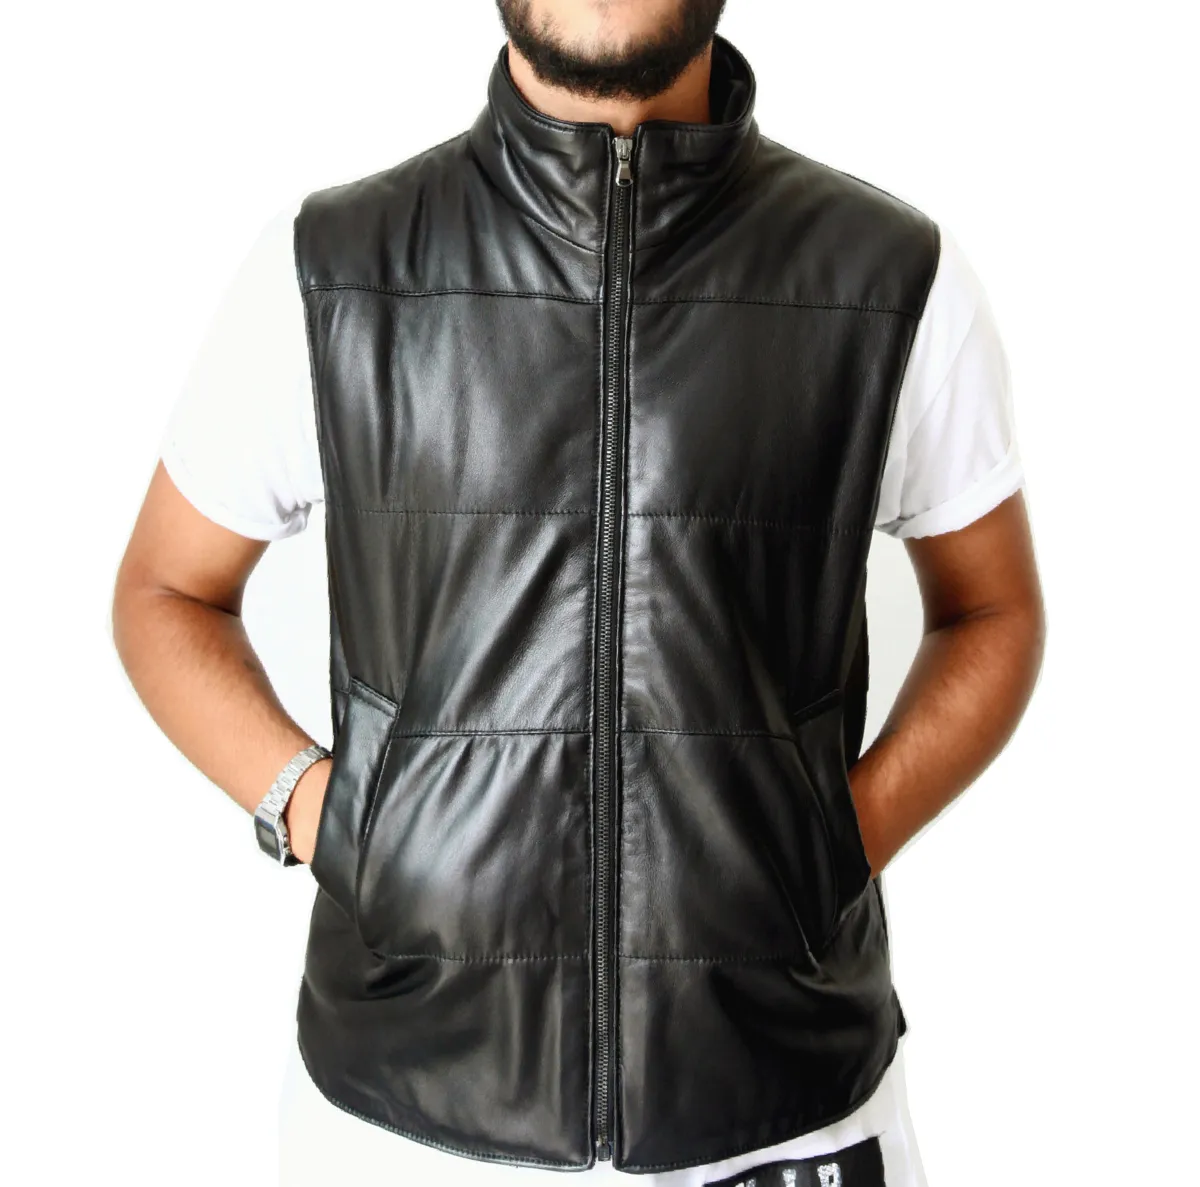 Made In Italy - Men's Leather Jacket in Genuine Leather - Quilted Gilet style Slim Fit leather custom jacket - Black Color